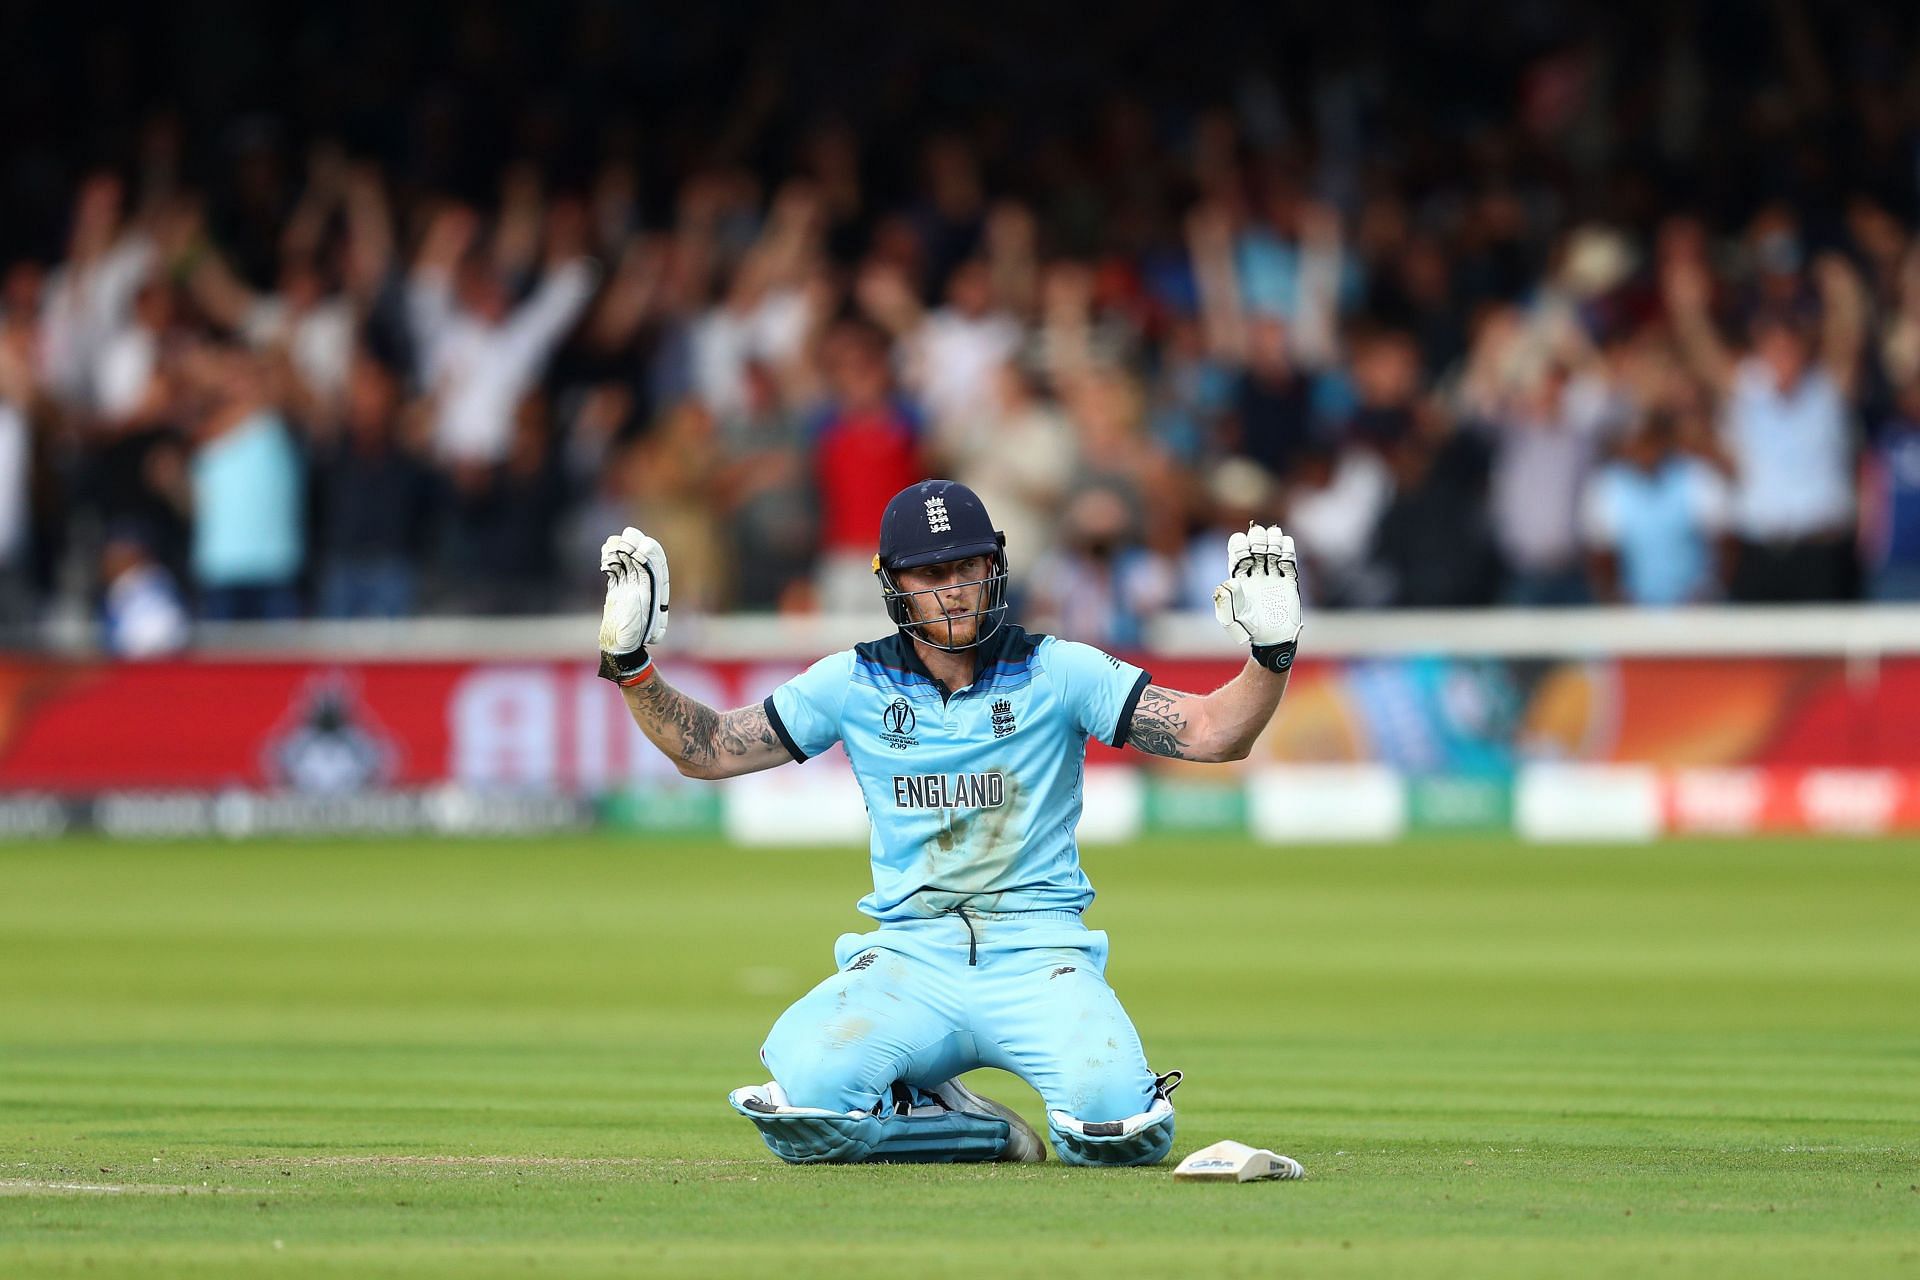 Ben Stokes in the 2019 ICC World Cup Final